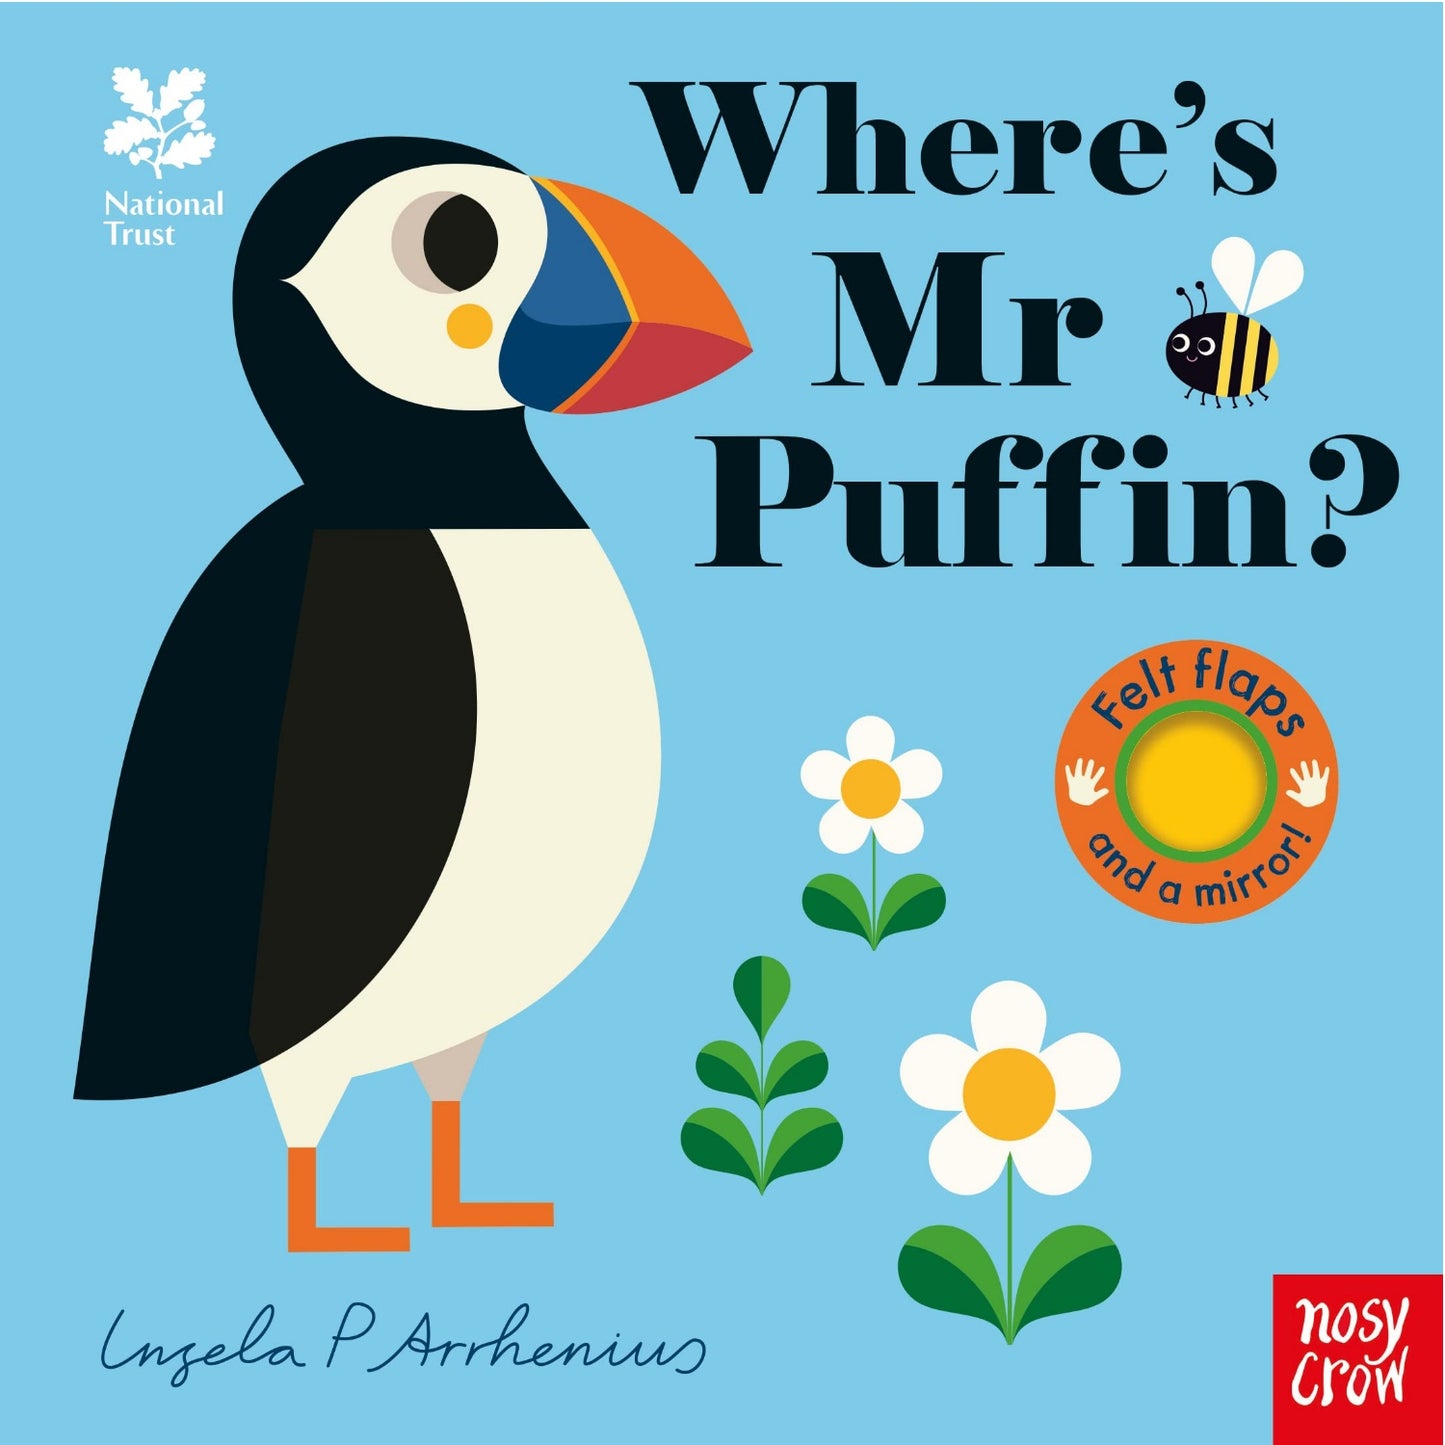 Where's Mr Puffin? | Felt Flaps Board Book for Babies & Toddlers